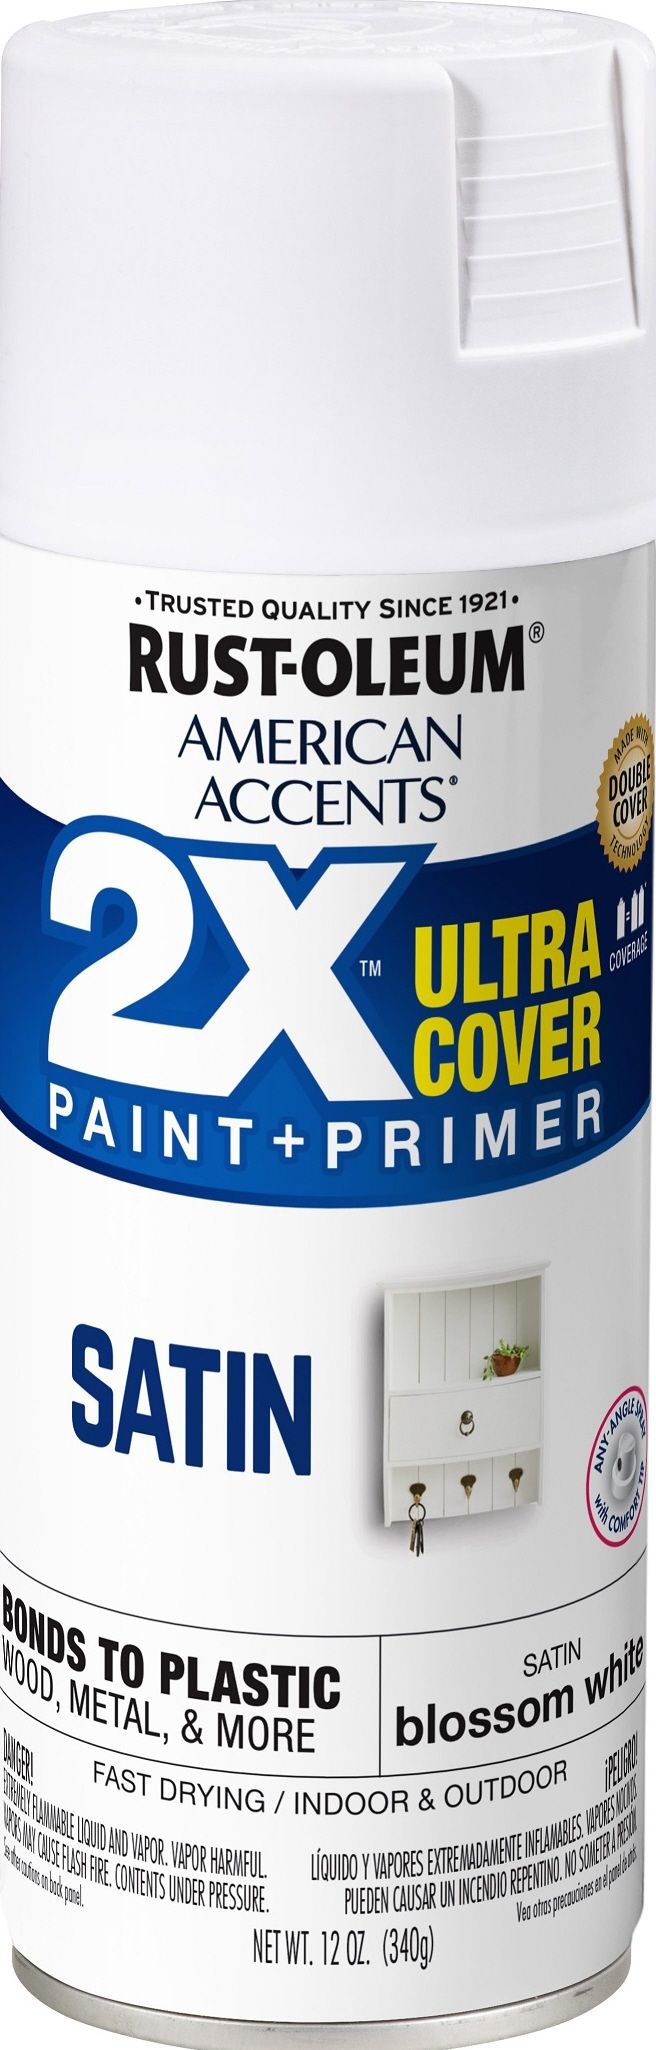 Blossom White, Rust-Oleum American Accents 2X Ultra Cover Satin Spray Paint, 12 oz | Walmart (US)